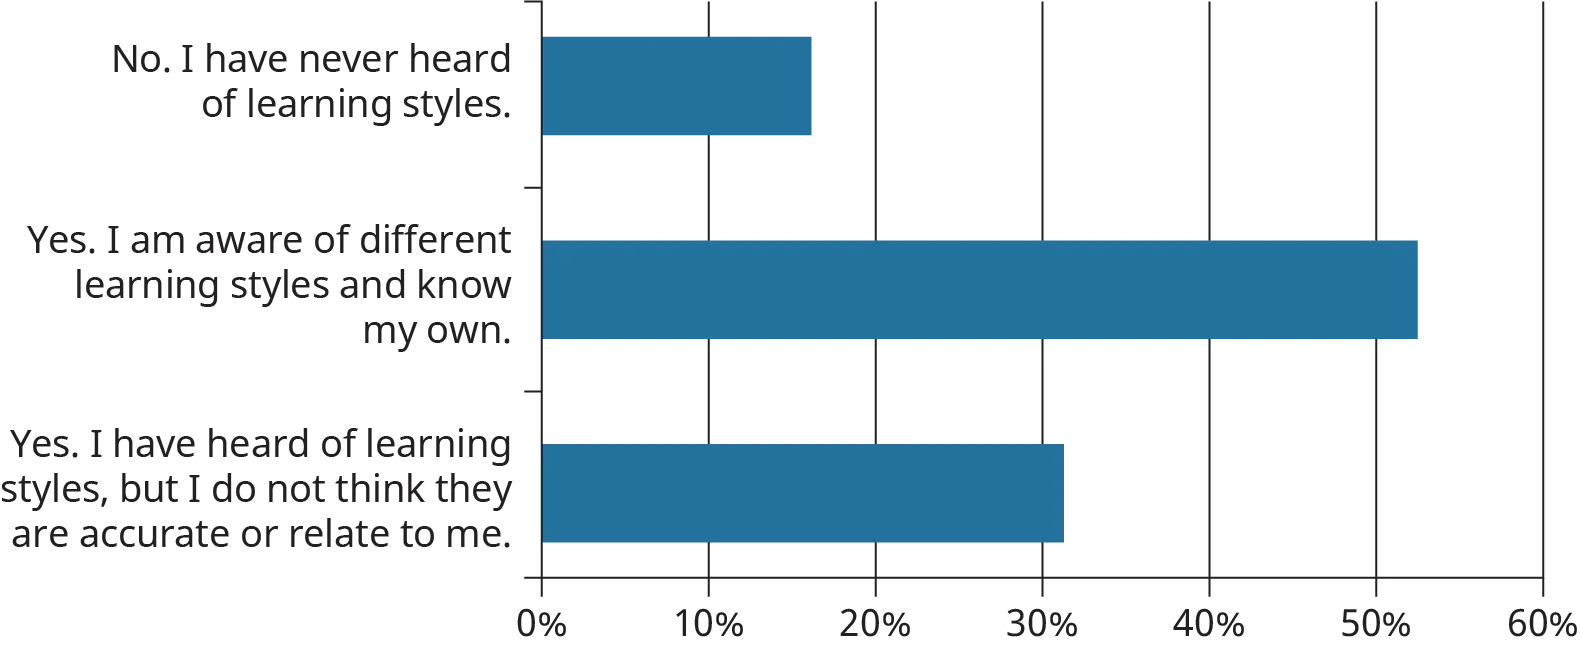 A horizontal bar chart shows the responses to a student’s survey asking, “Have you ever heard of learning styles or know your own learning style?”